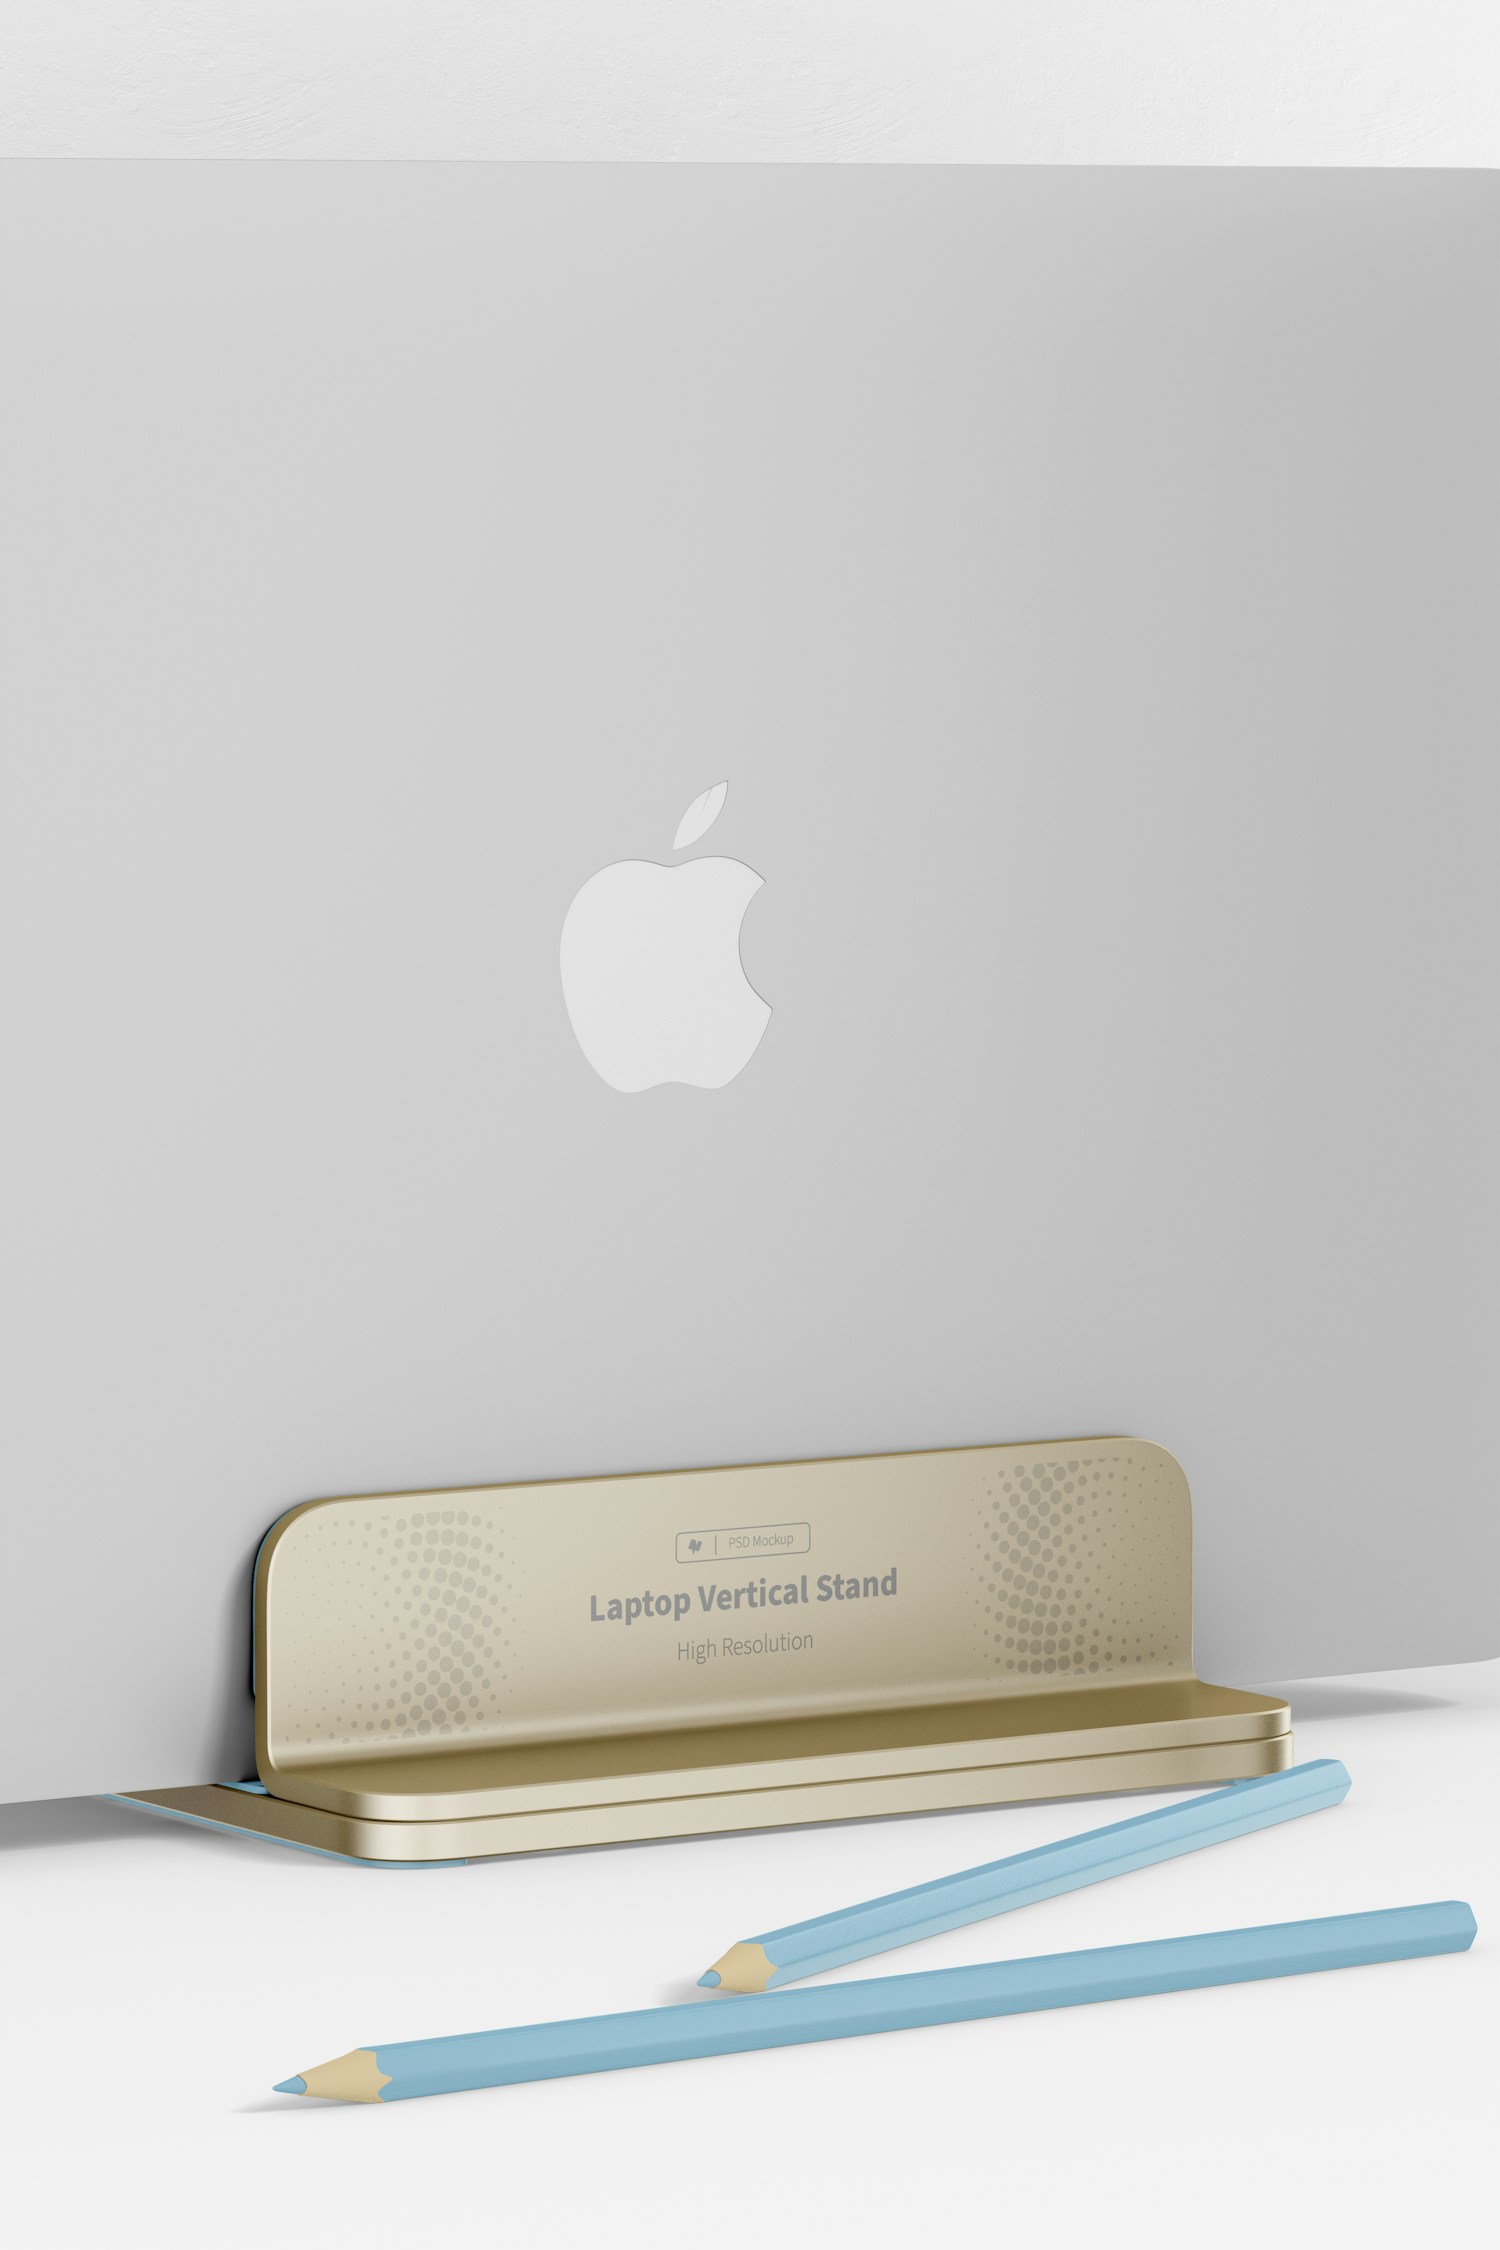 Laptop Vertical Stand Mockup, Perspective View